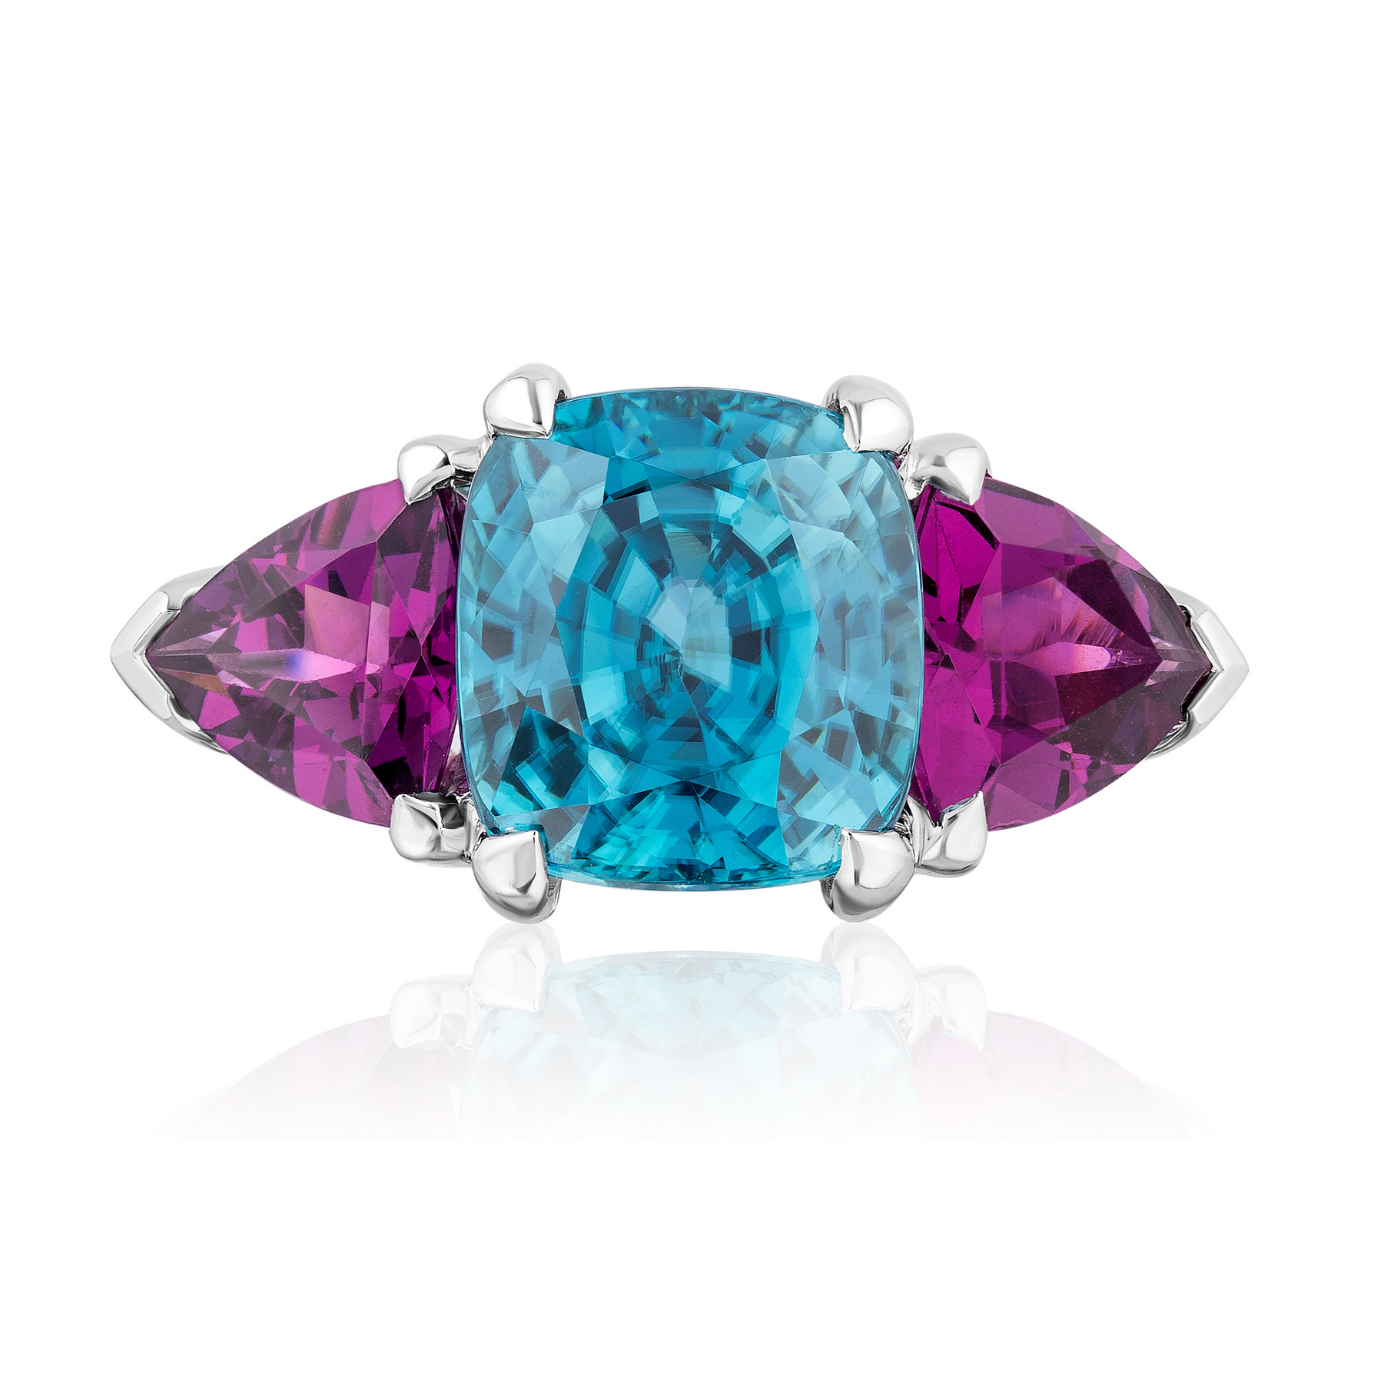 One-of-a-Kind Blue Zircon and Purple Garnet Ring